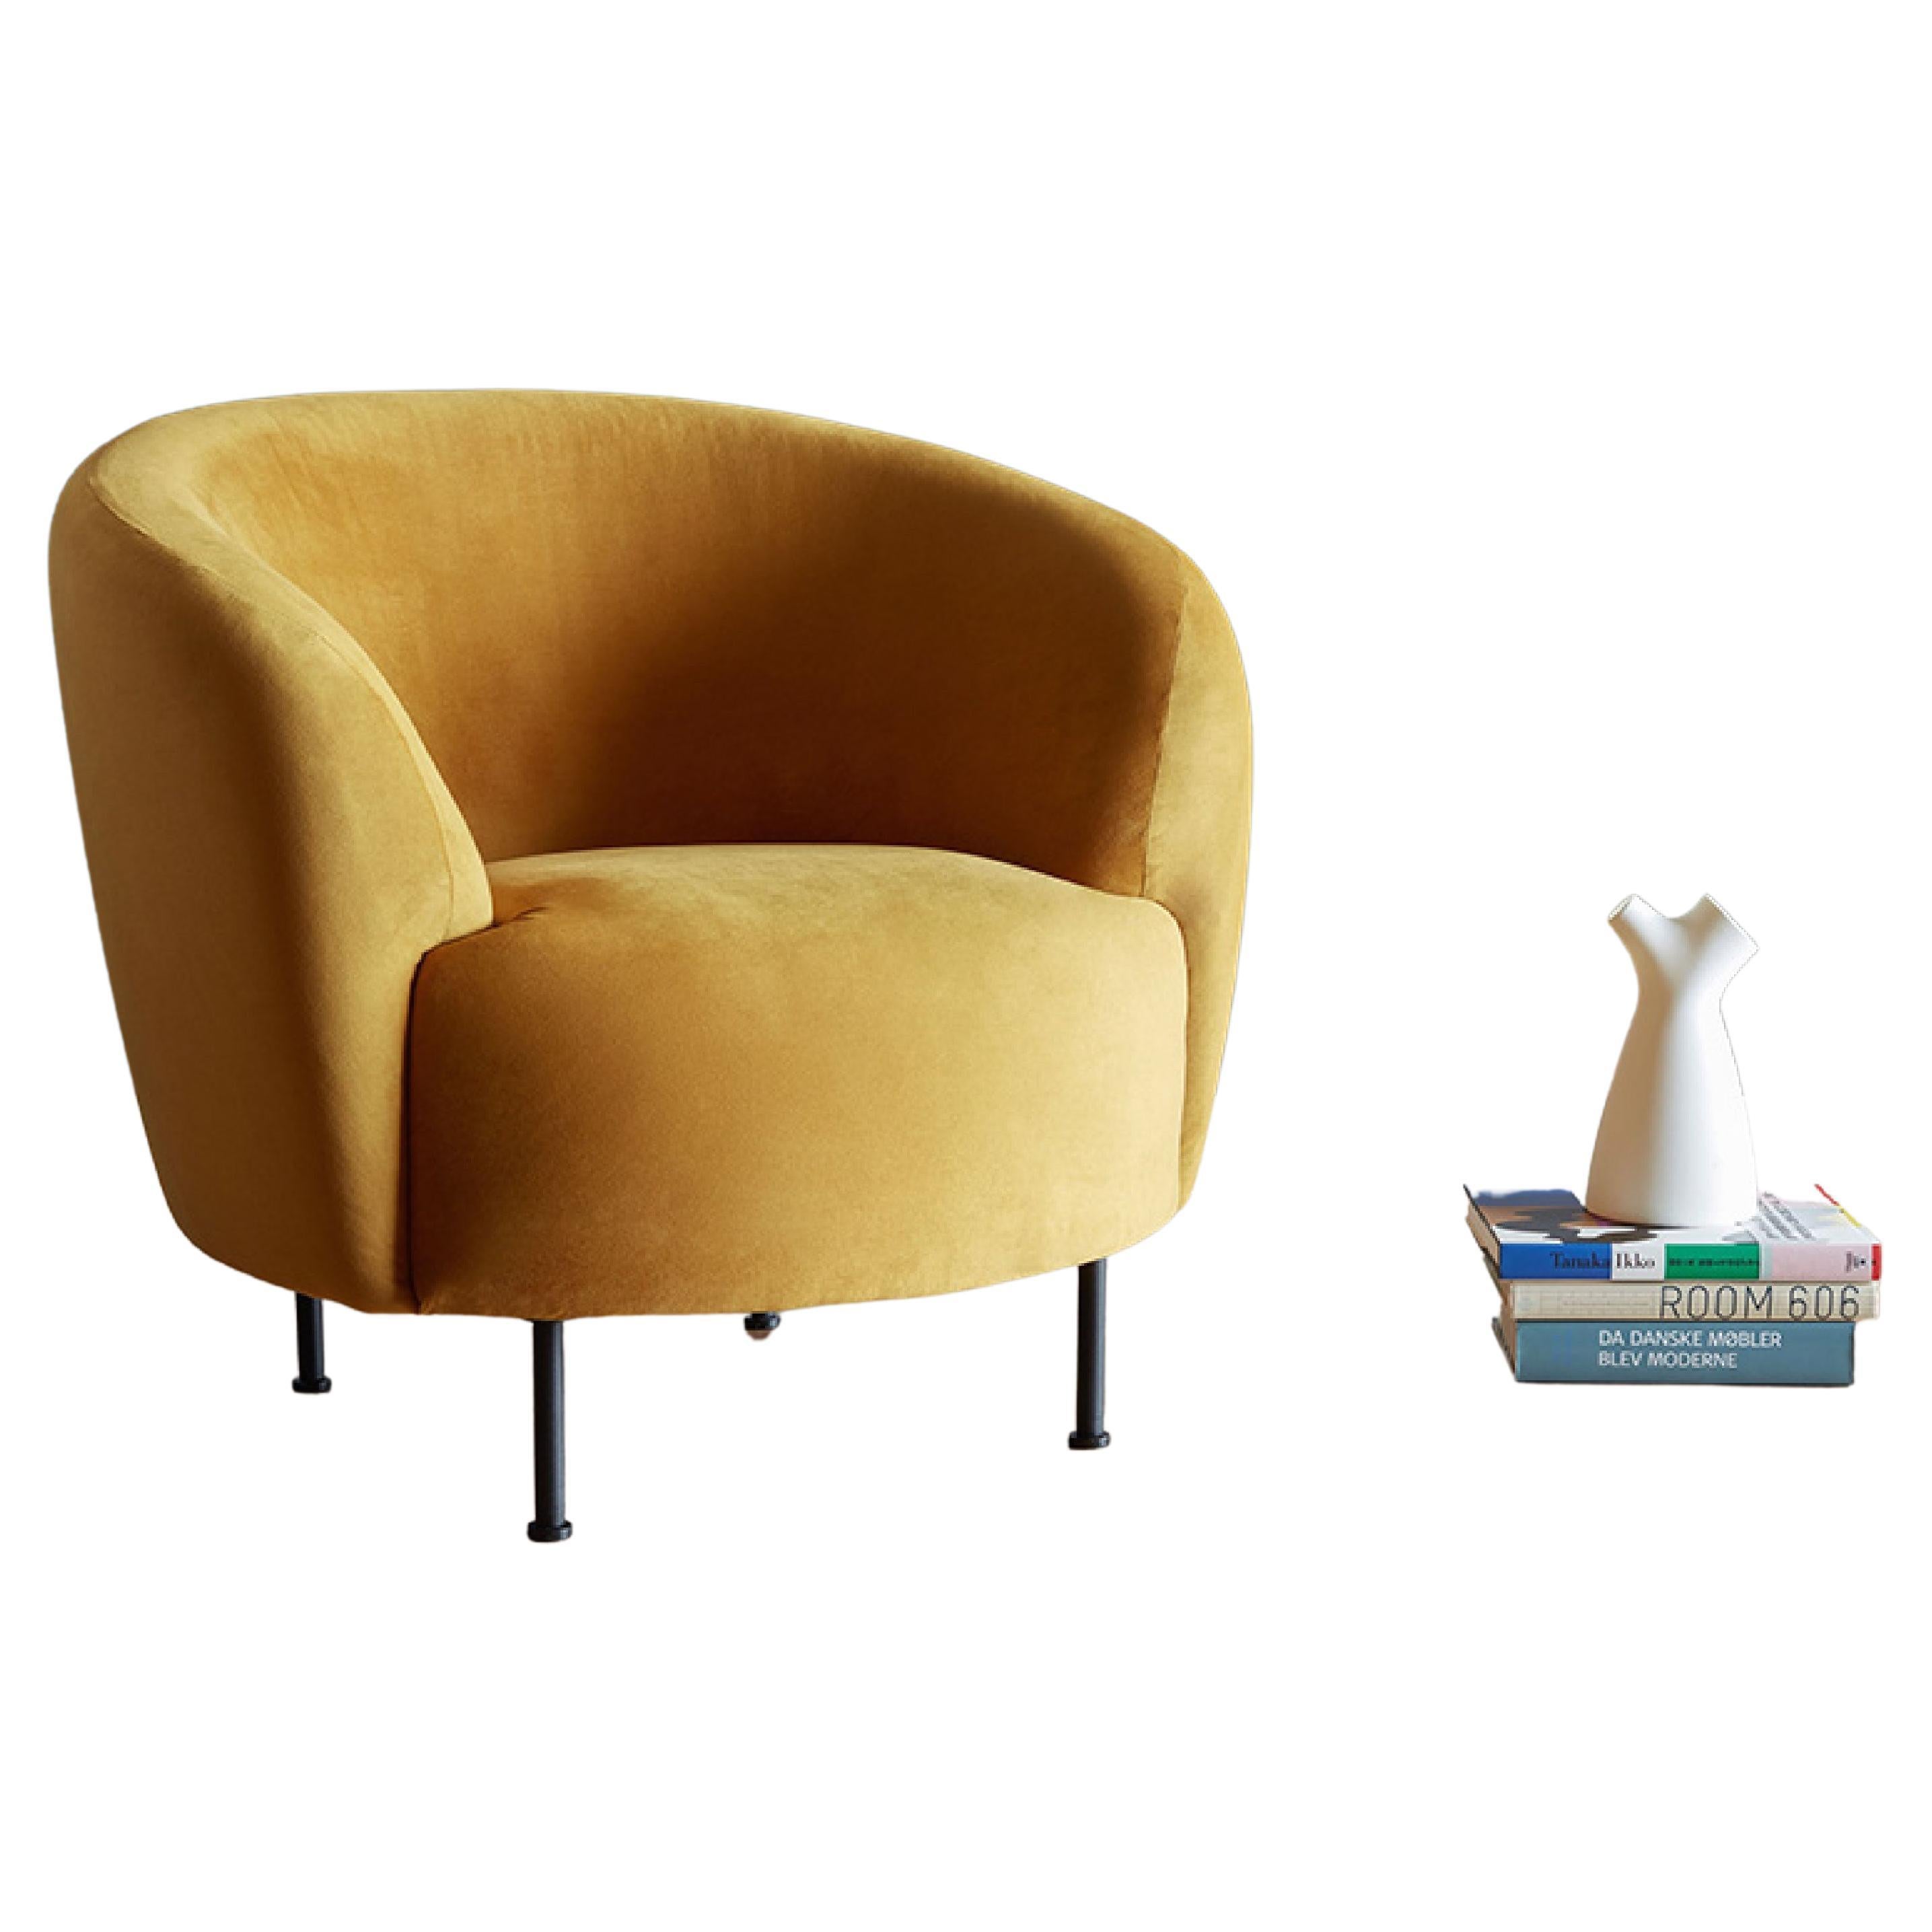 Hayche Glover Armchair - Metal Legs - Yellow, UK, Made to Order For Sale